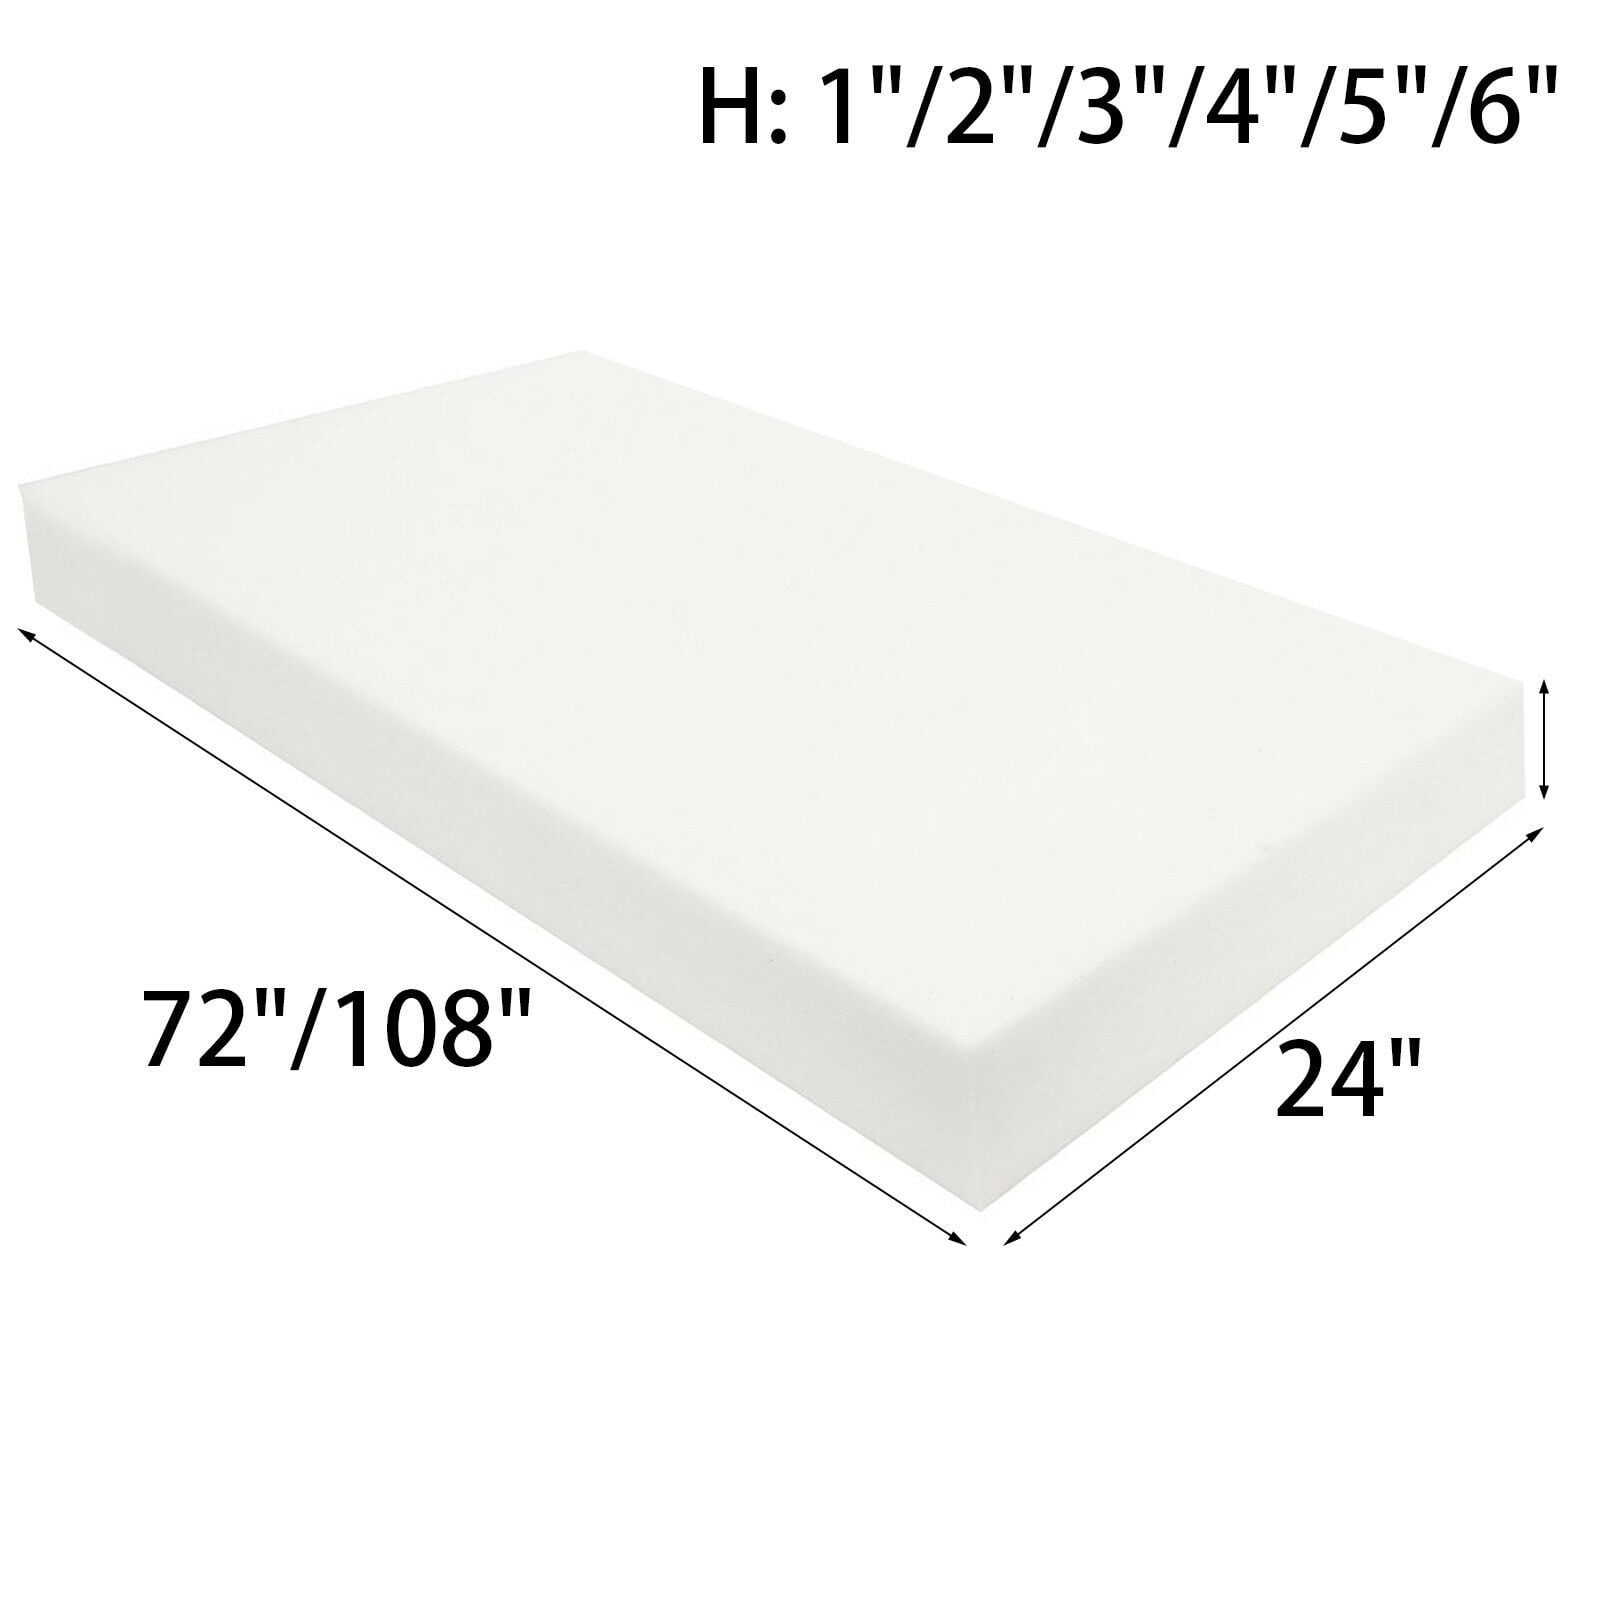 High Density Upholstery Foam Seat Sofa Cushion Replacement Sheets